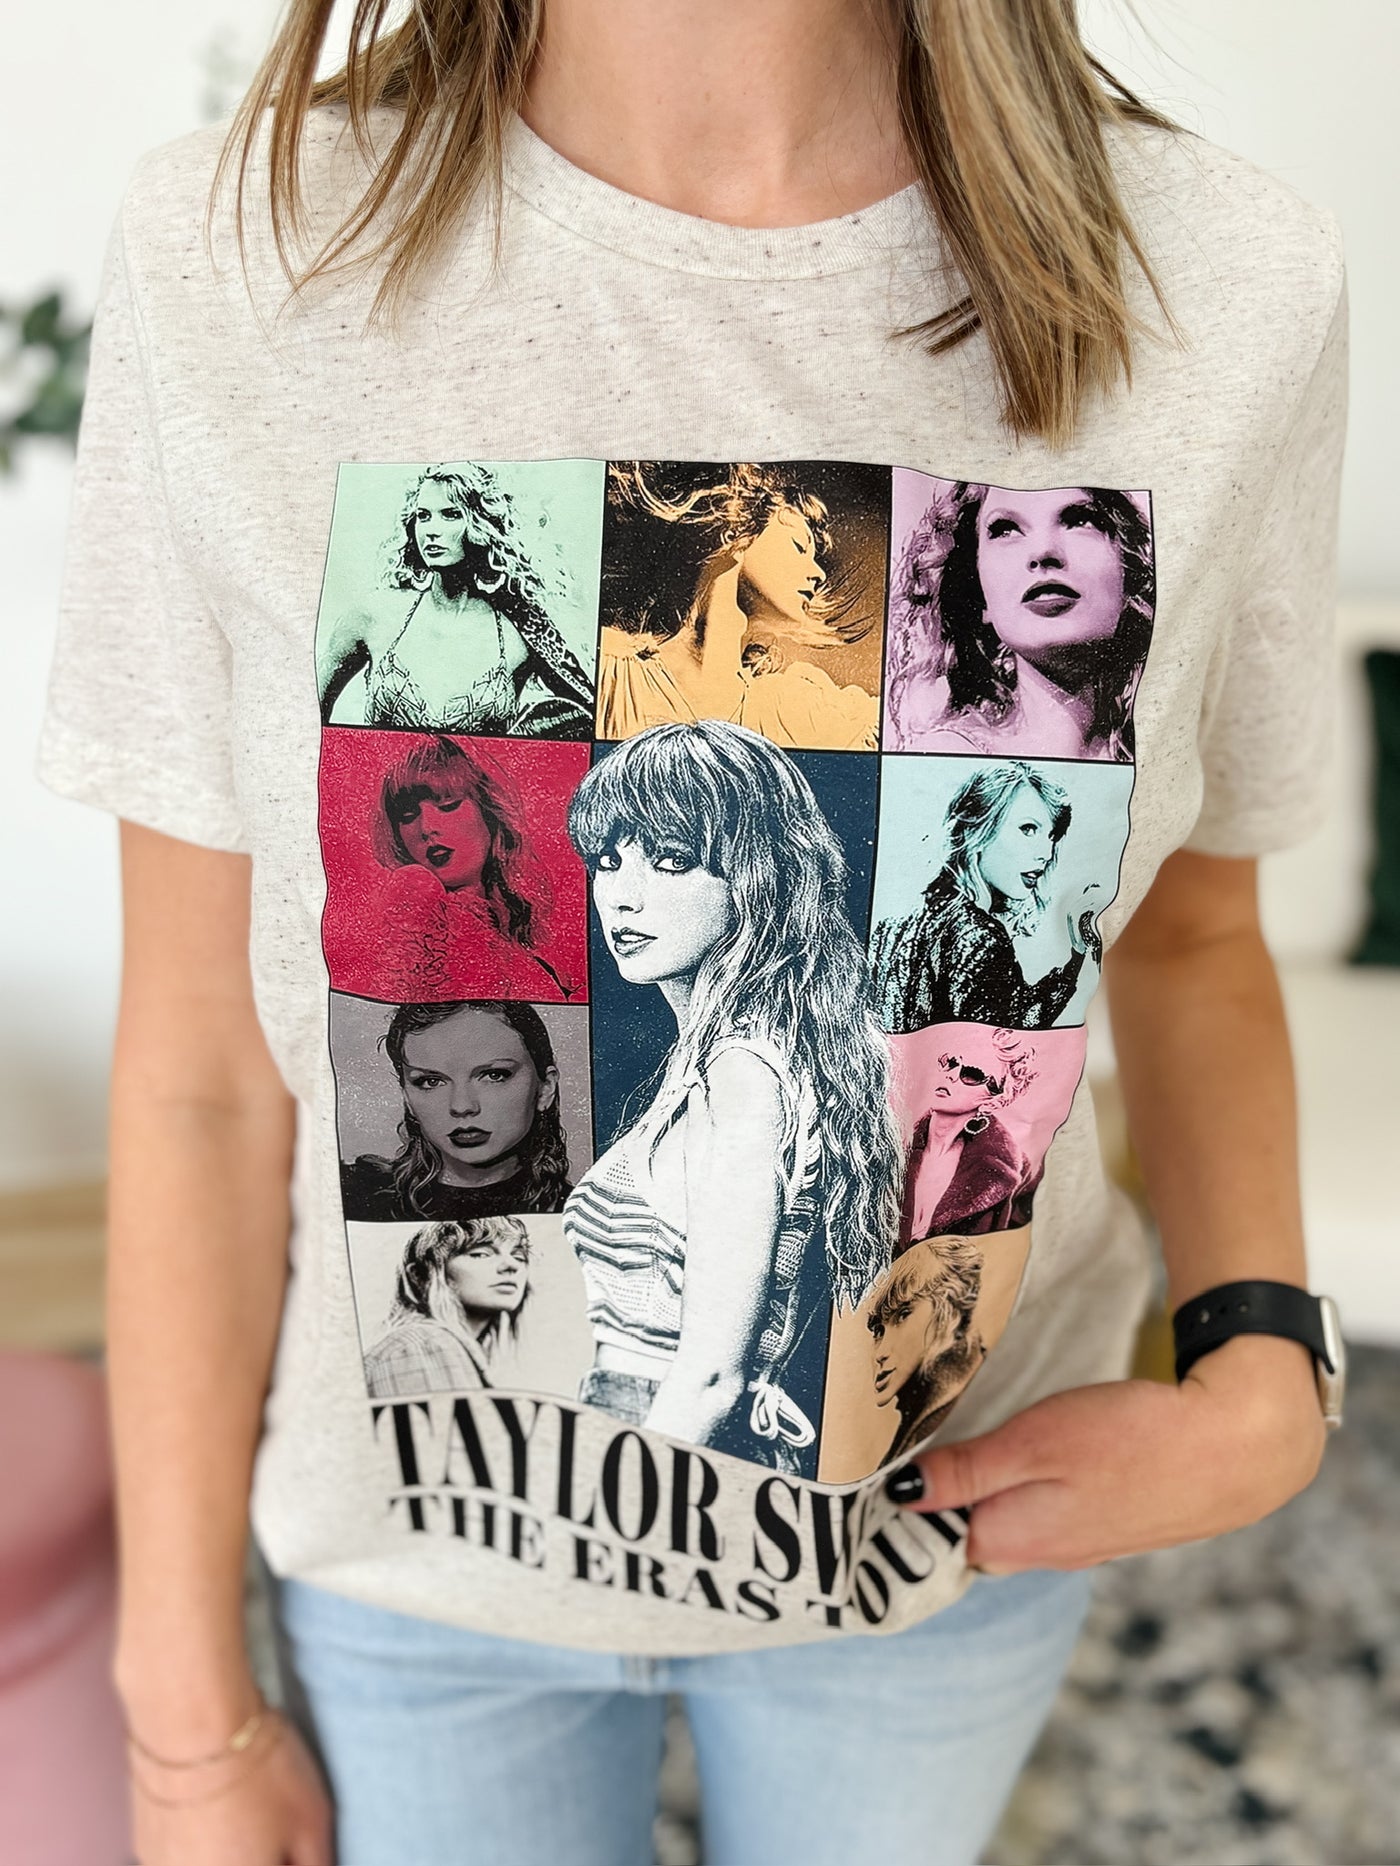 Taylor Swift "The Eras Tour" Graphic Tee